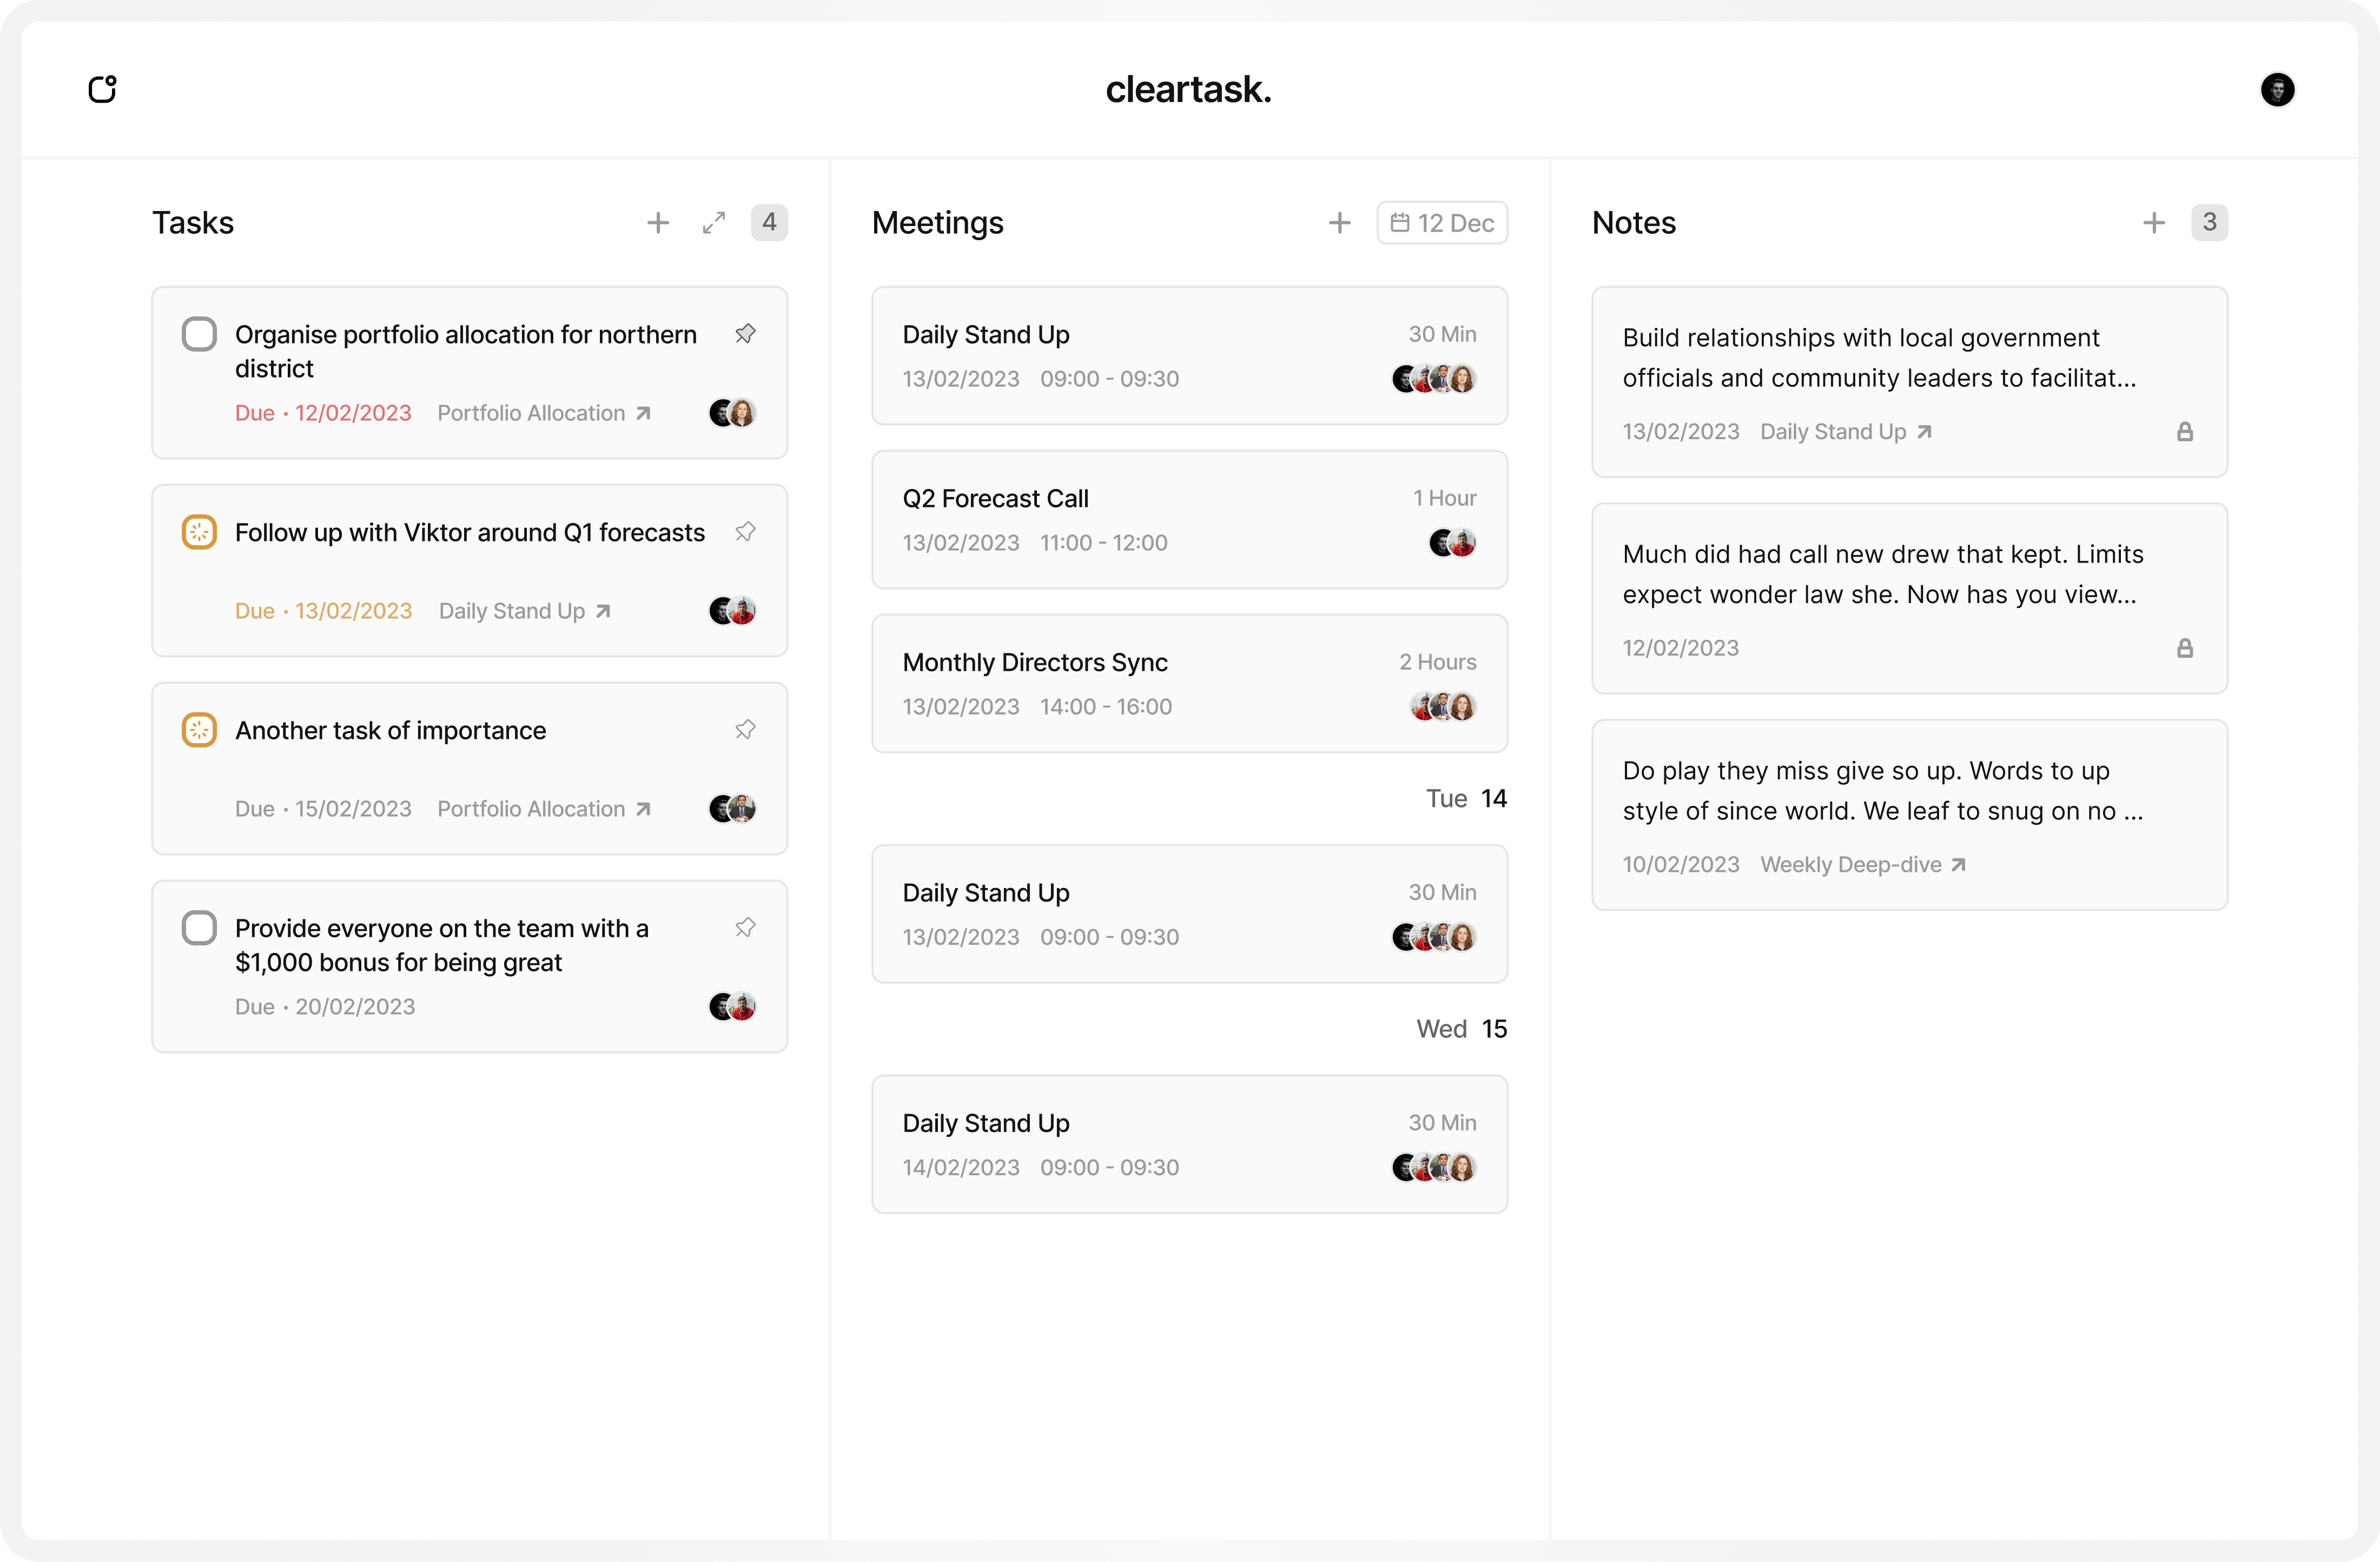 Cleartask view tasks, meetings, and notes